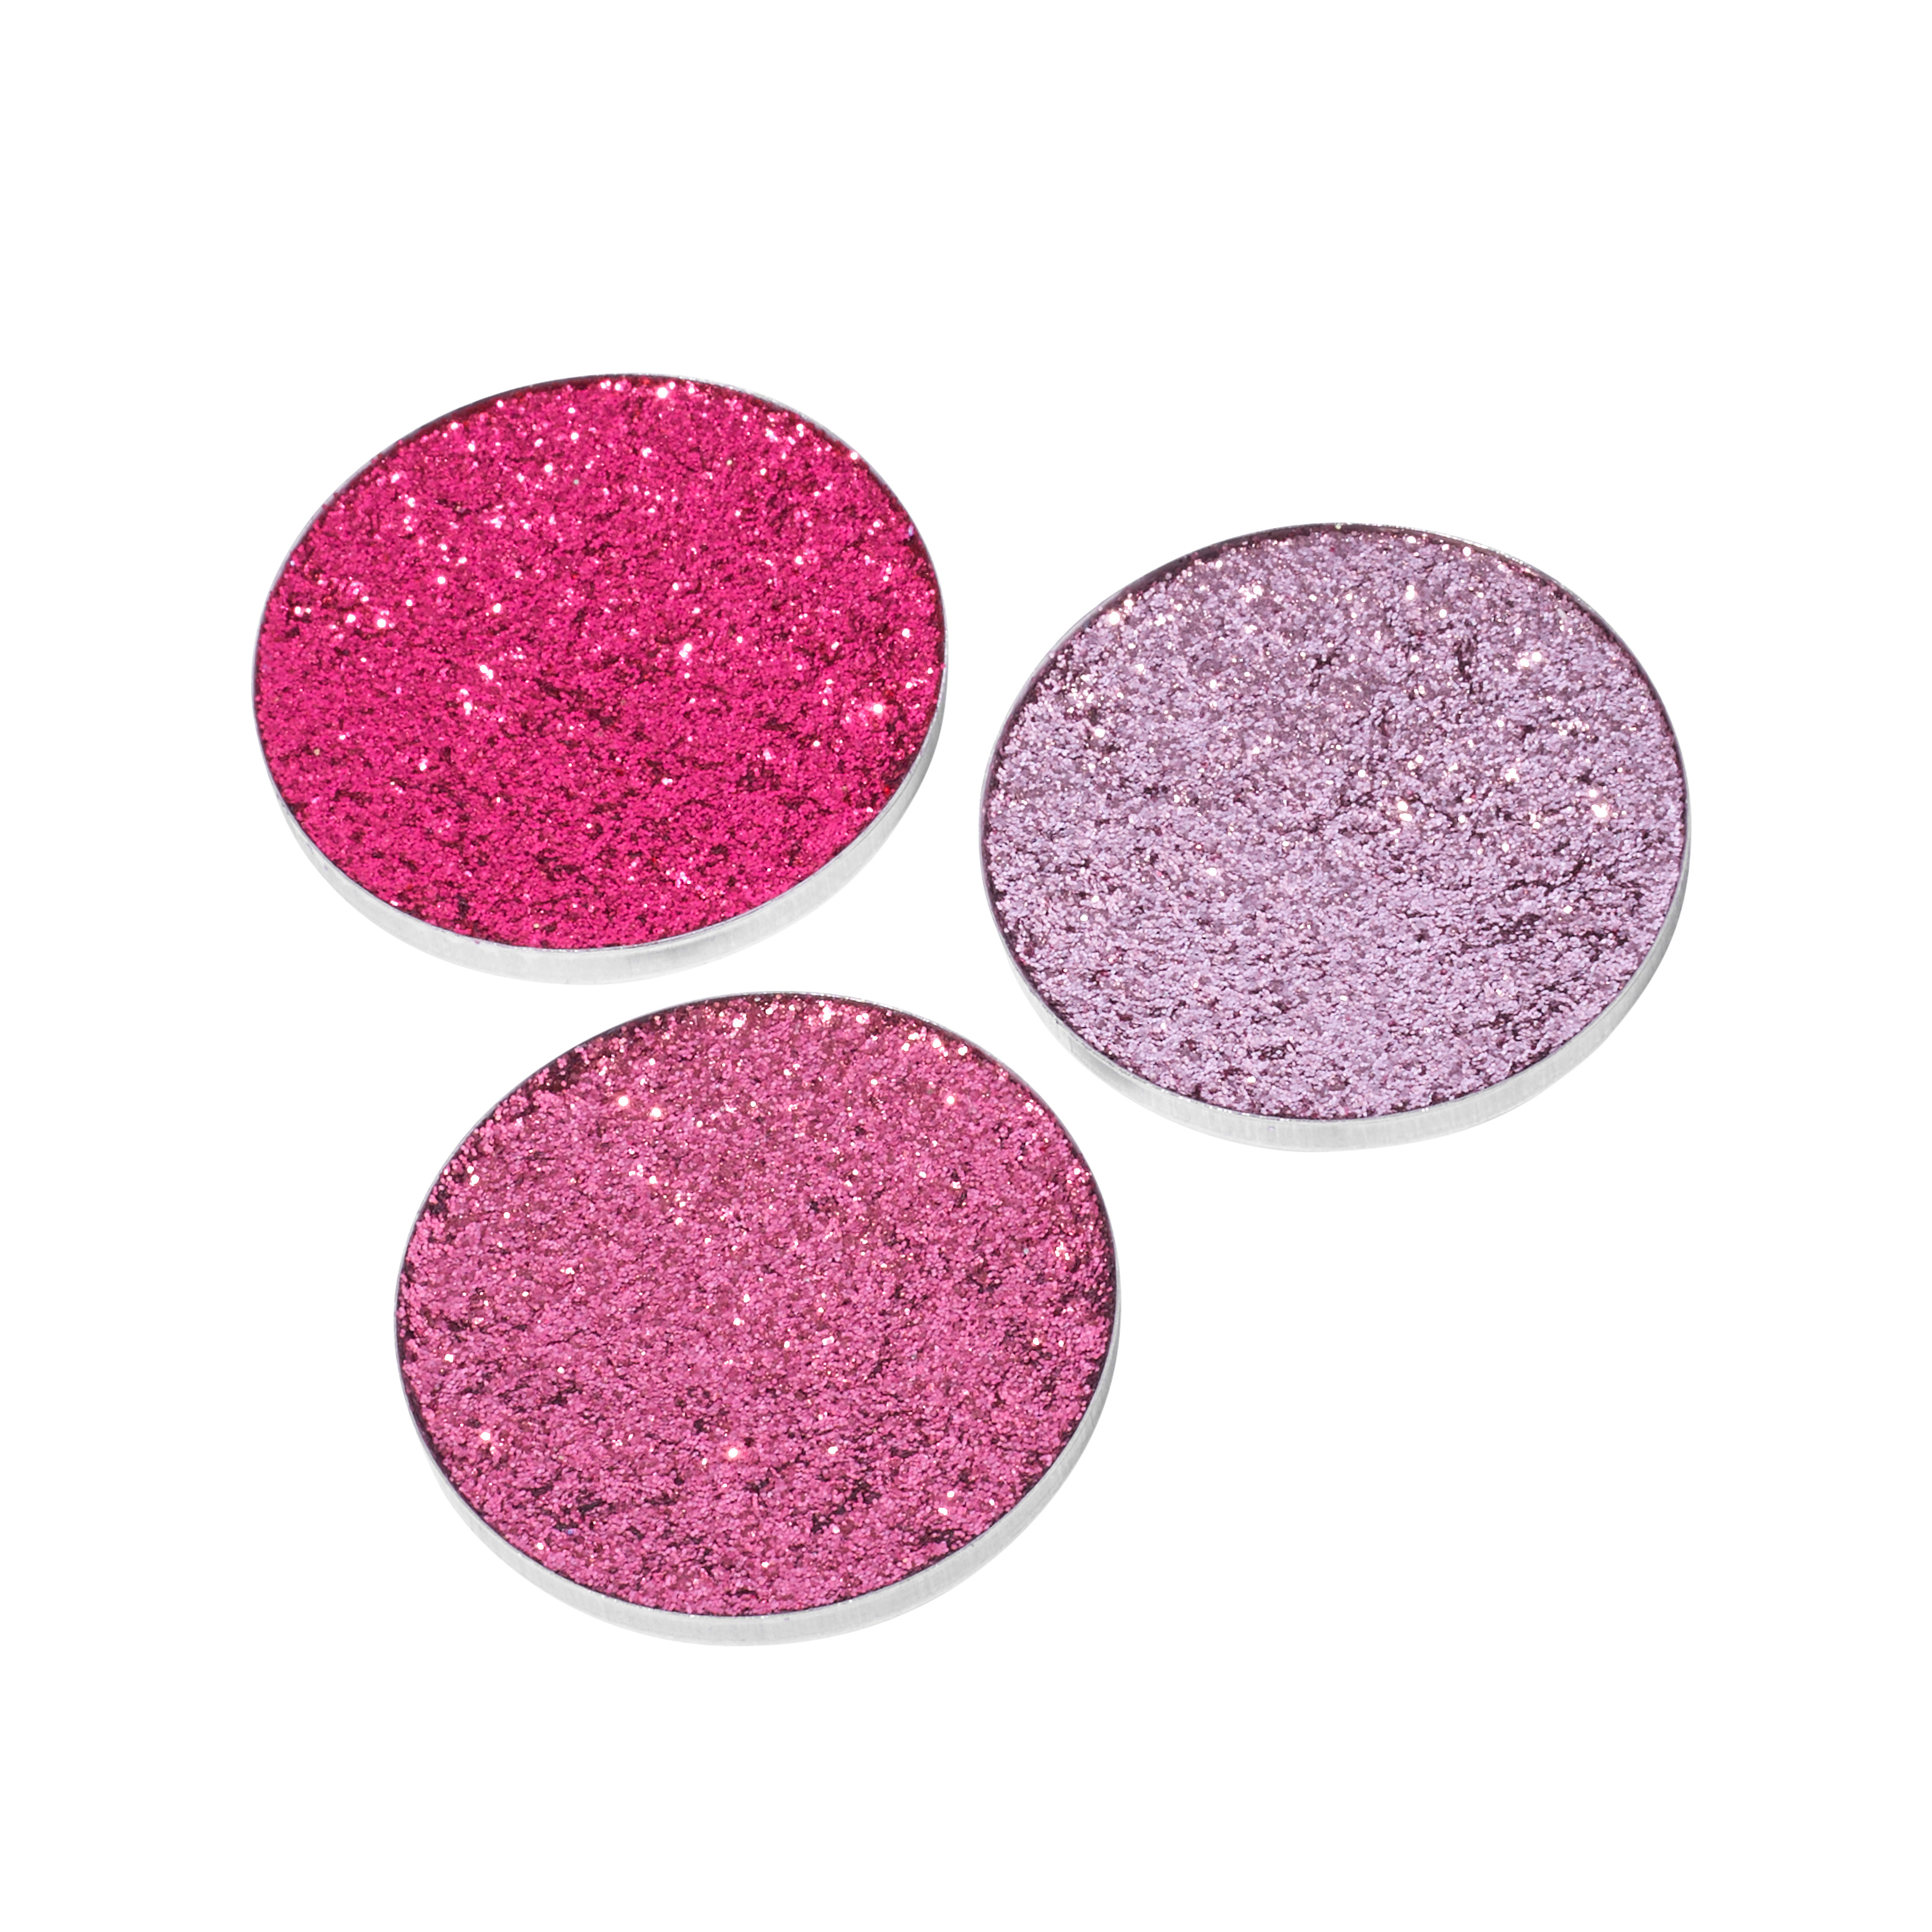 with love cosmetics pressed glitter trio blush; cotton candy; hot pink